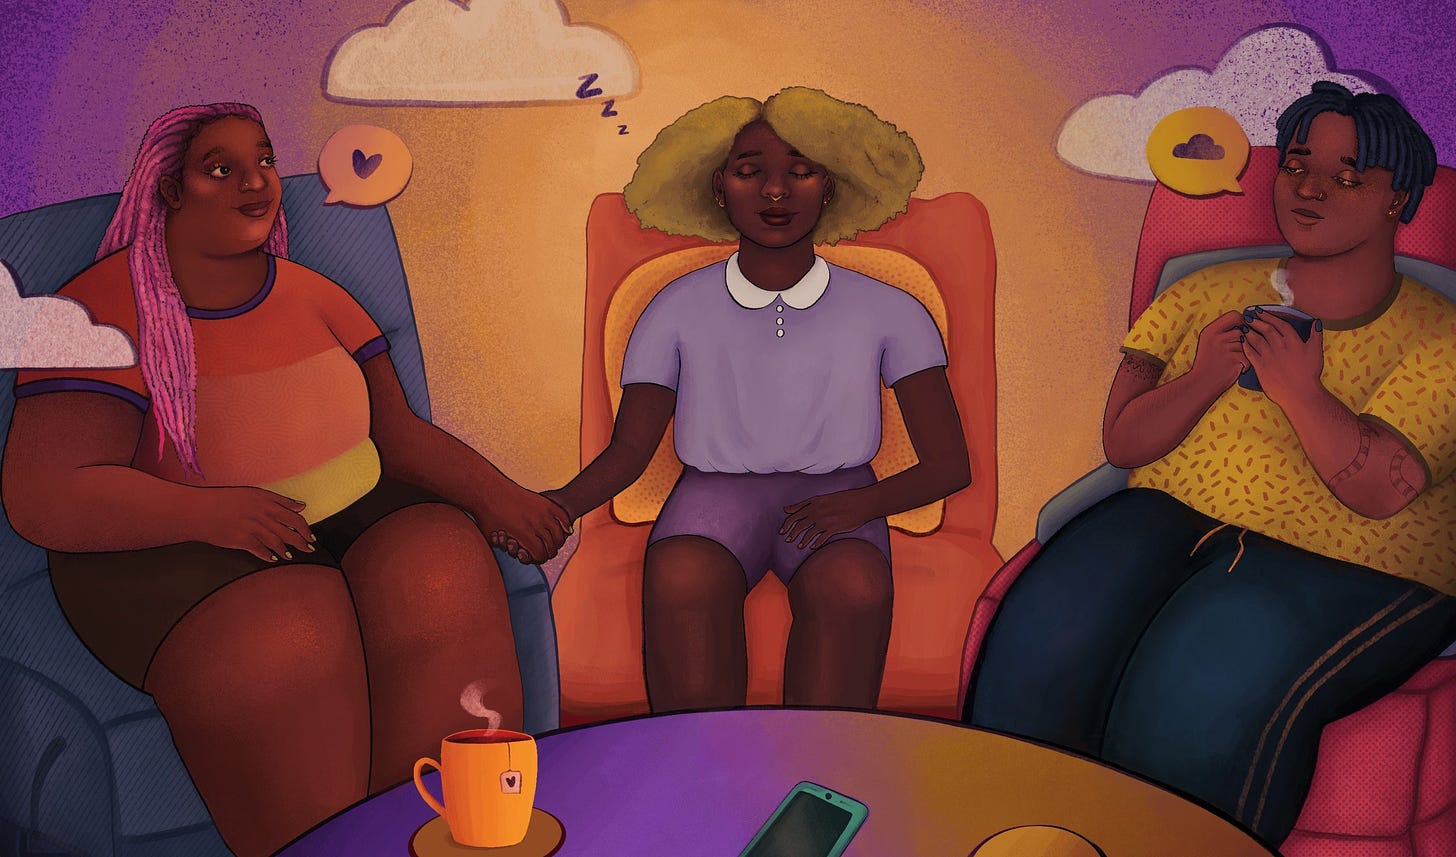 Three Black friends sit in comfortable chairs and supportive recliners during an evening conversation. In the middle, a friend with narcolepsy falls asleep smiling while clouds drift behind her head. Her girlfriend sits to the left, holding her hand while talking to another sleepy friend across the table. This friend cups hot cocoa to their chest. Everyone is dressed in colorful t-shirts and there is cozy, warm light throughout the room.